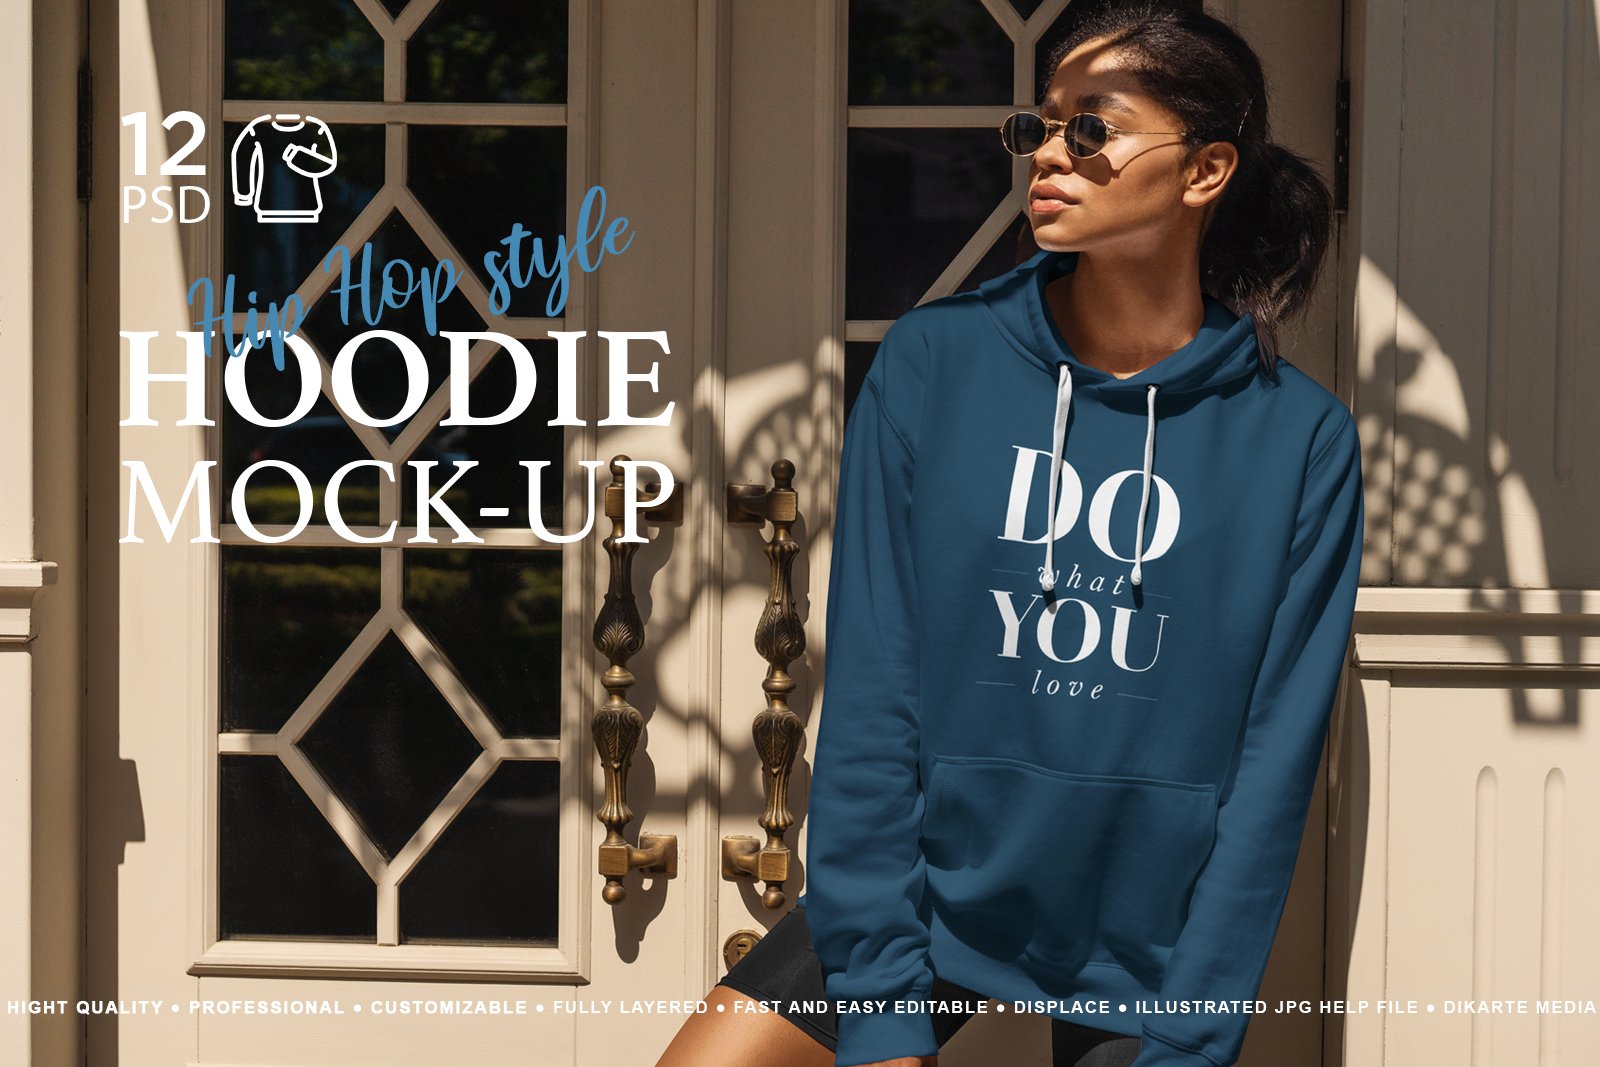 Hoodie Mock-Up Hip Hop Style cover image.